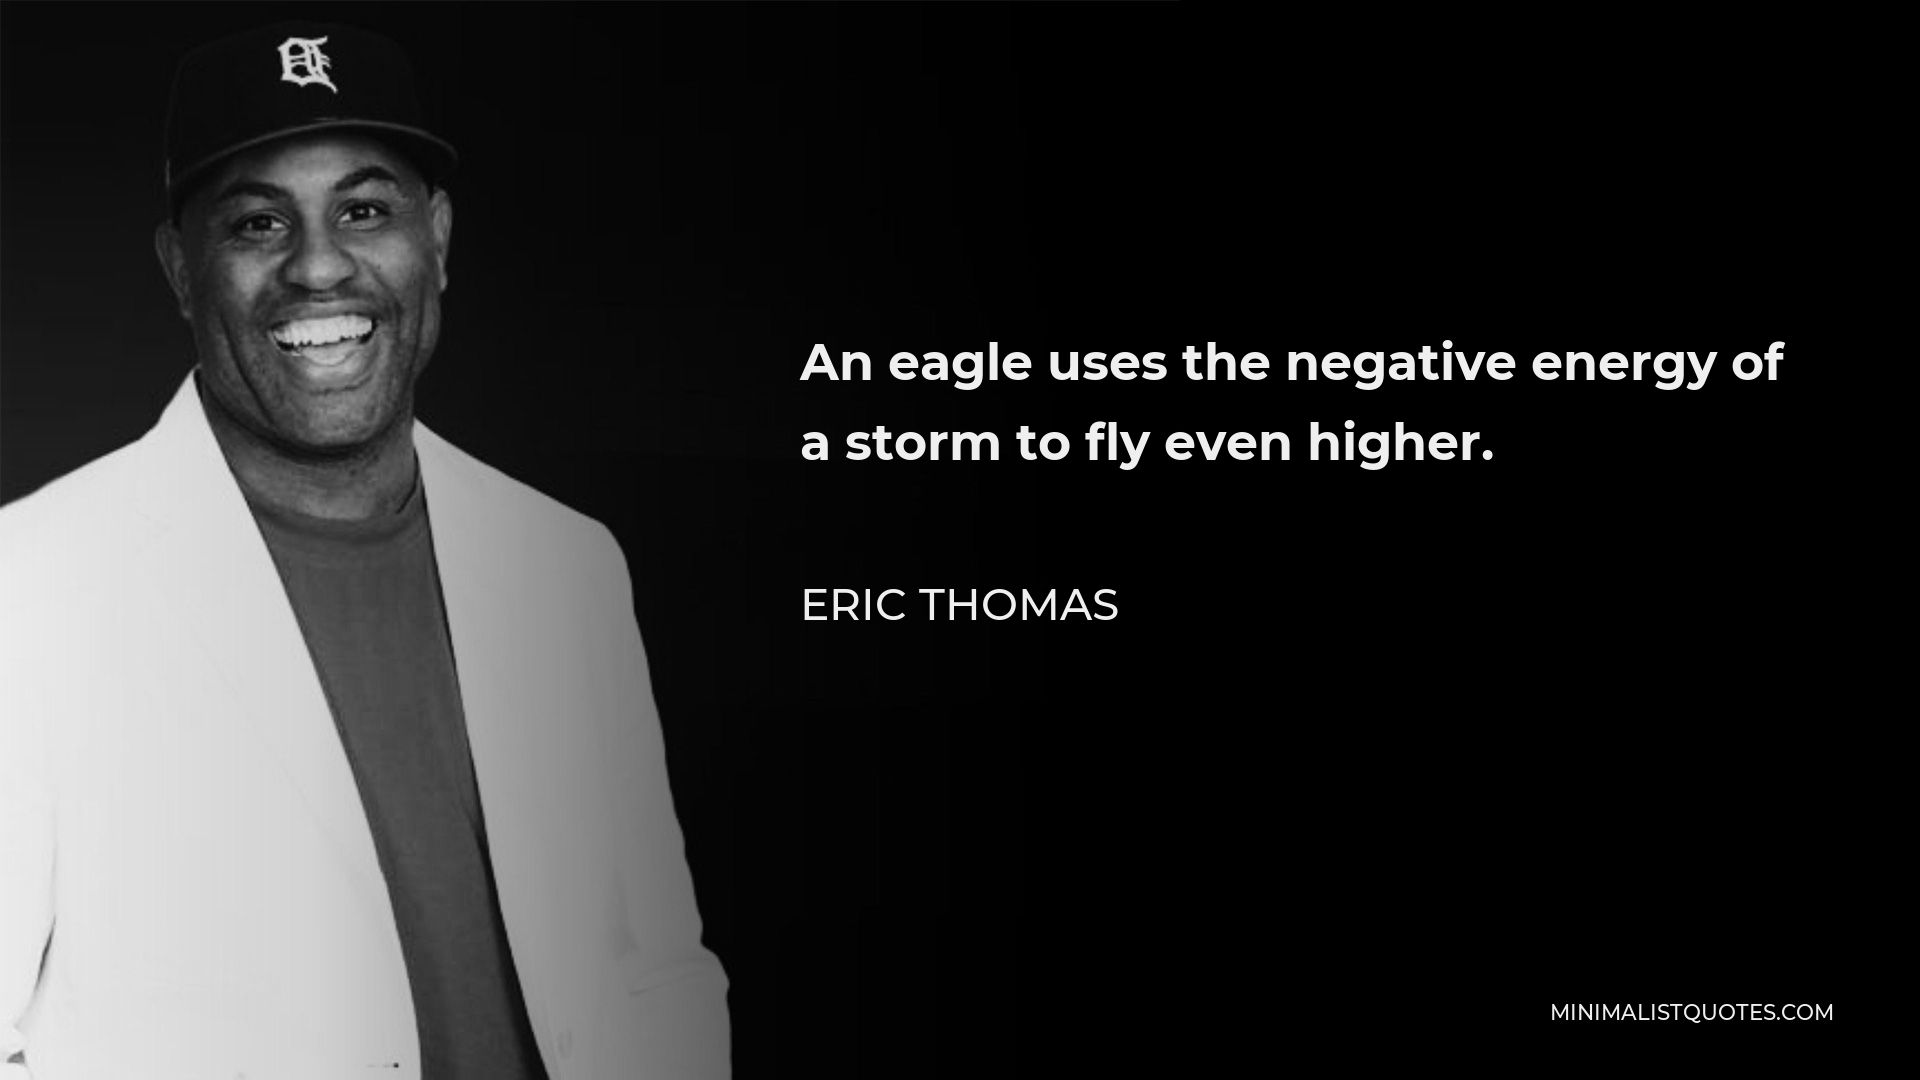 Eric Thomas Quote - An eagle uses the negative energy of a storm to fly even higher.